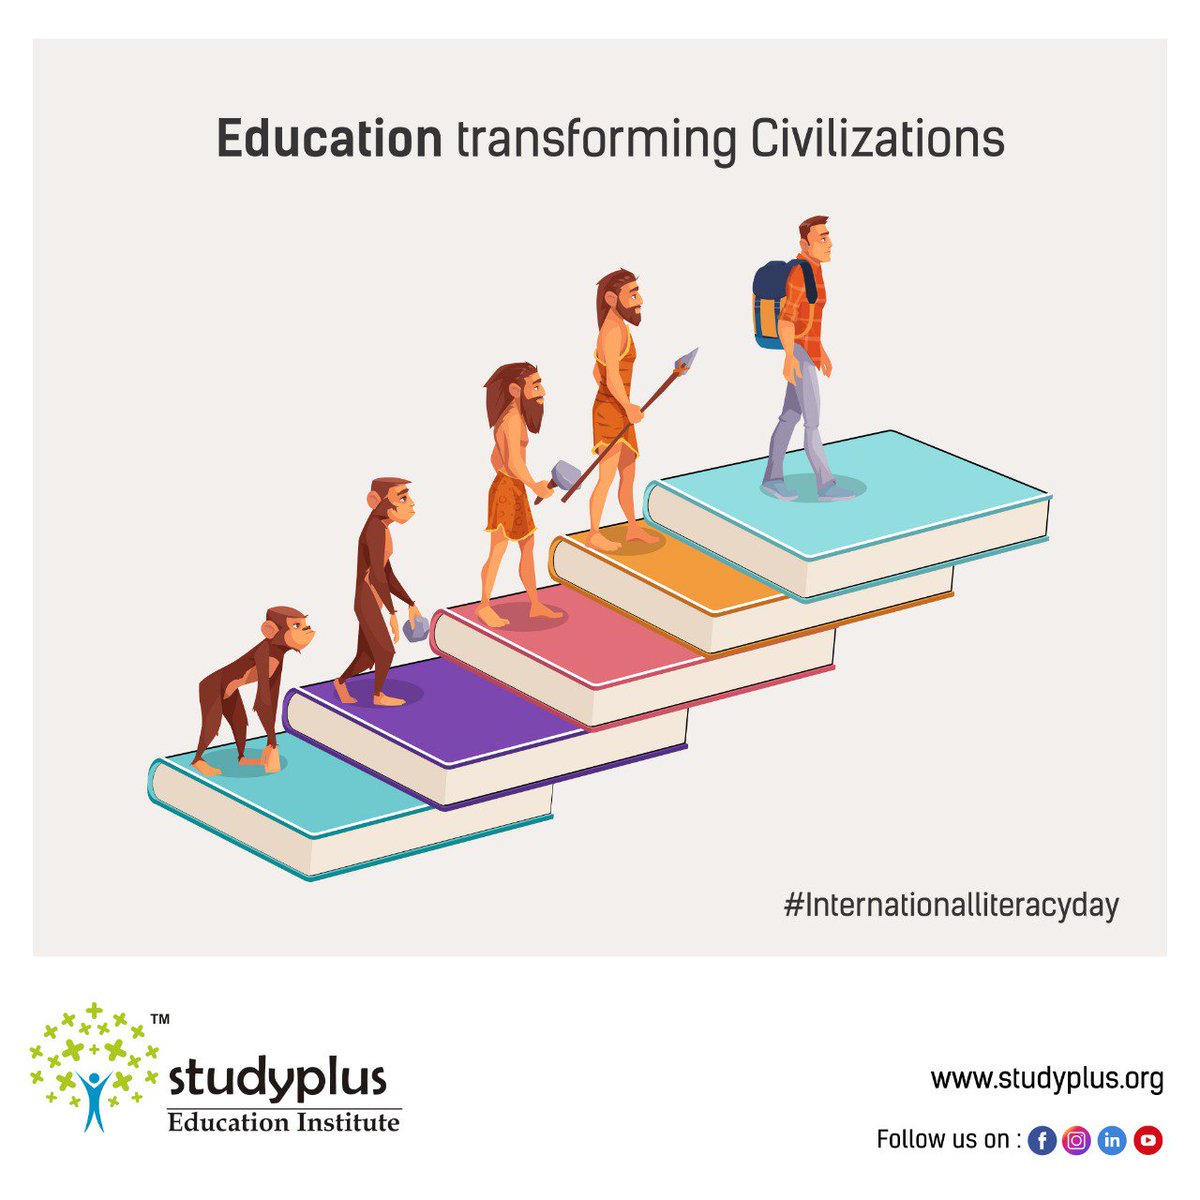 Once you start learning all your questions are answered.
.
studyplus.org
.
#literacy #literacymatters #literacyday #literacycenters #lnternationalLiteracyDay #LiteracyKnowledge #LiteracyIsForEveryone